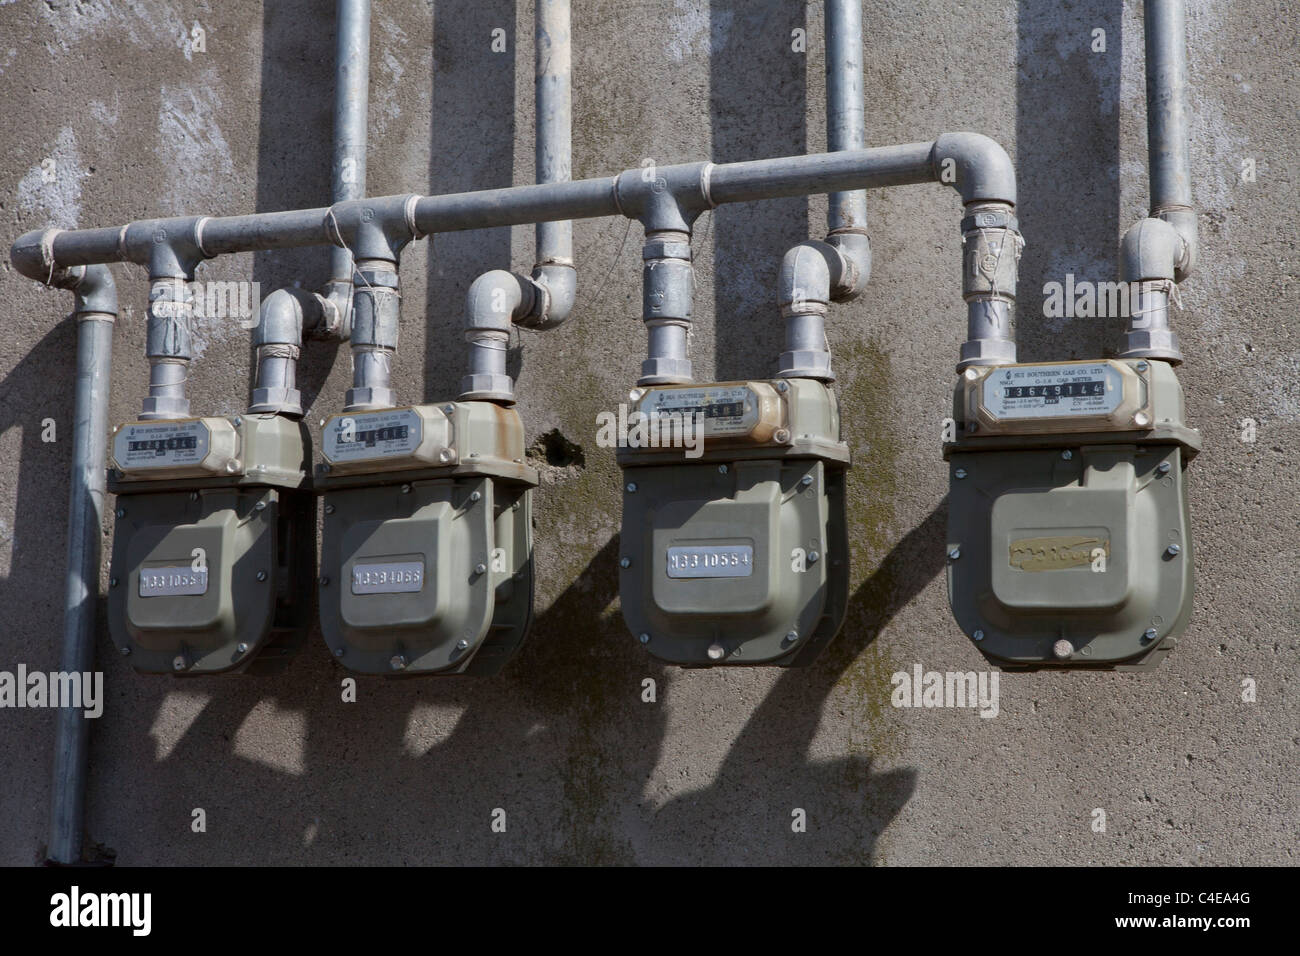 electricity meter of the osama bin ladens's house in Abbottabad, pakistan Stock Photo